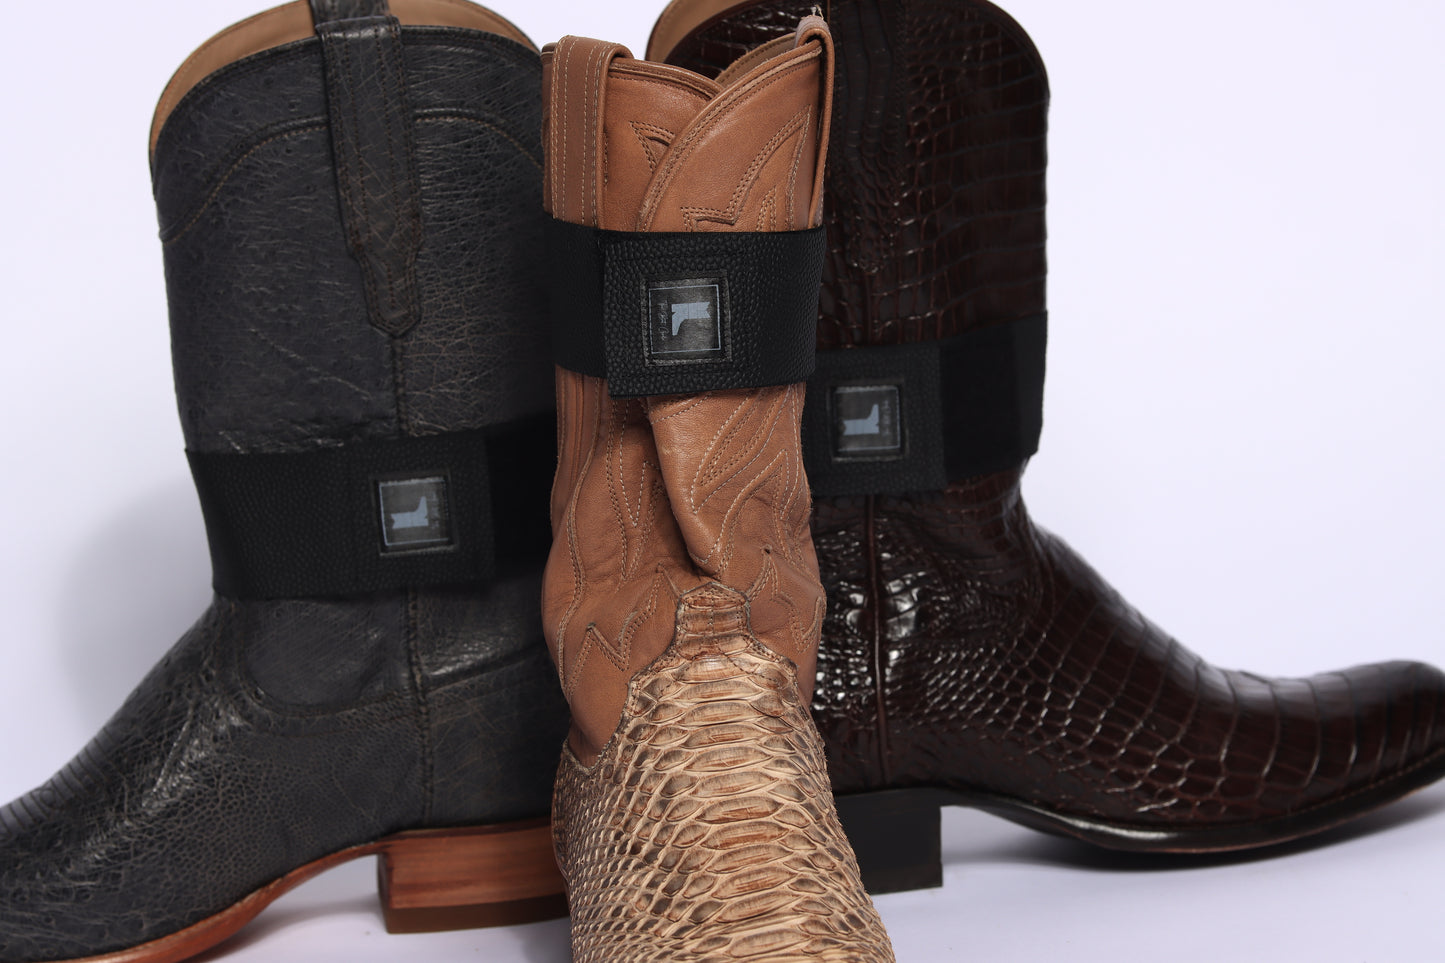 Bootlasso - Boot Straps, Cowboy Boots